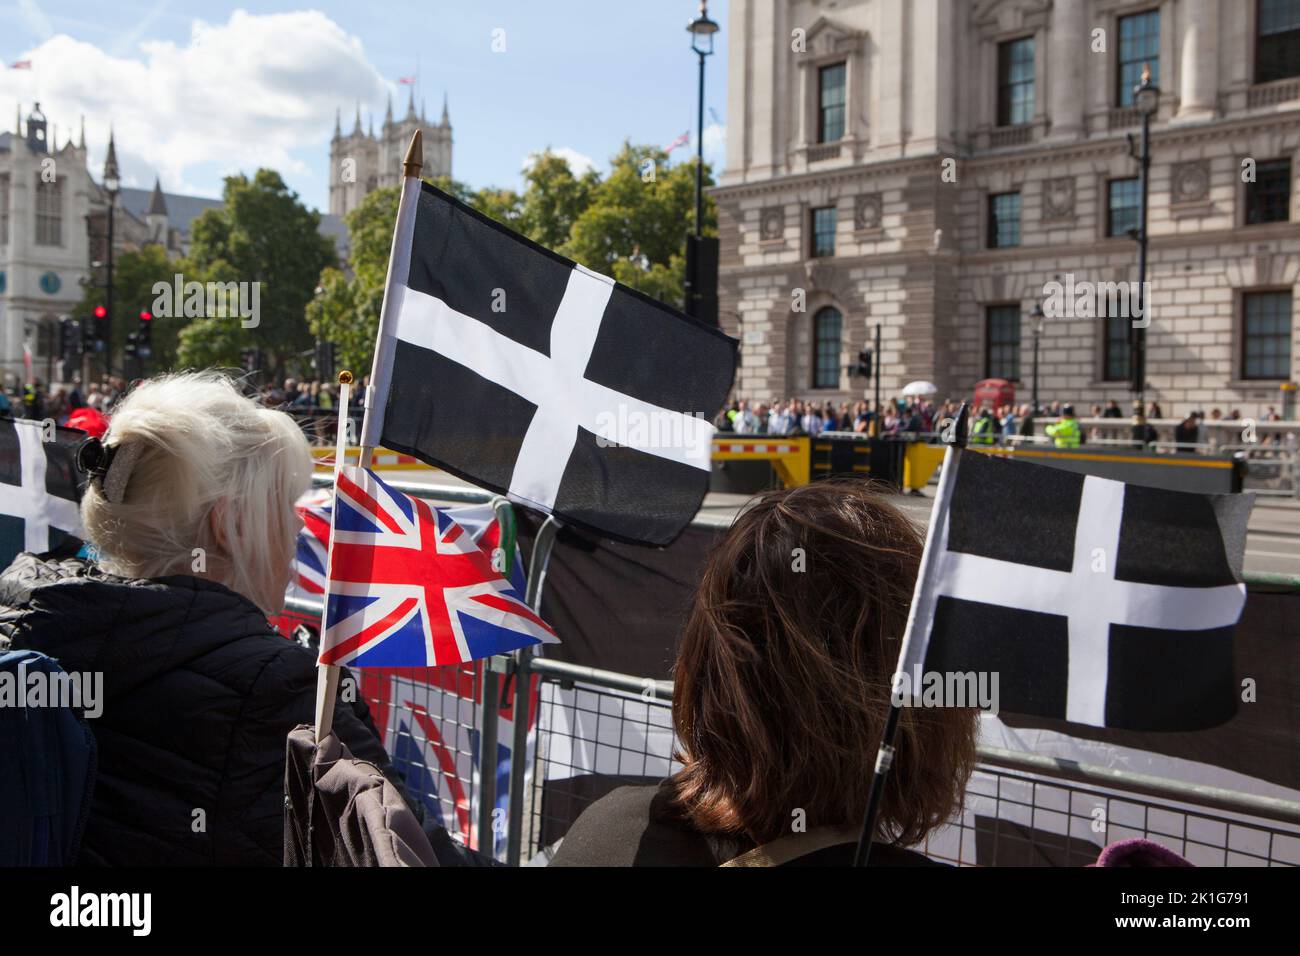 London, UK, 18 September 2022: Crowds are filling the streets of Whitehall to pay their respects to the late monarch Queen Elizabeth II, whose funeral takes place tomorrow. Some people are camping along the processional route that the coffin will take after the service at Westminster Abbey.  Anna Watson/Alamy Live News Stock Photo